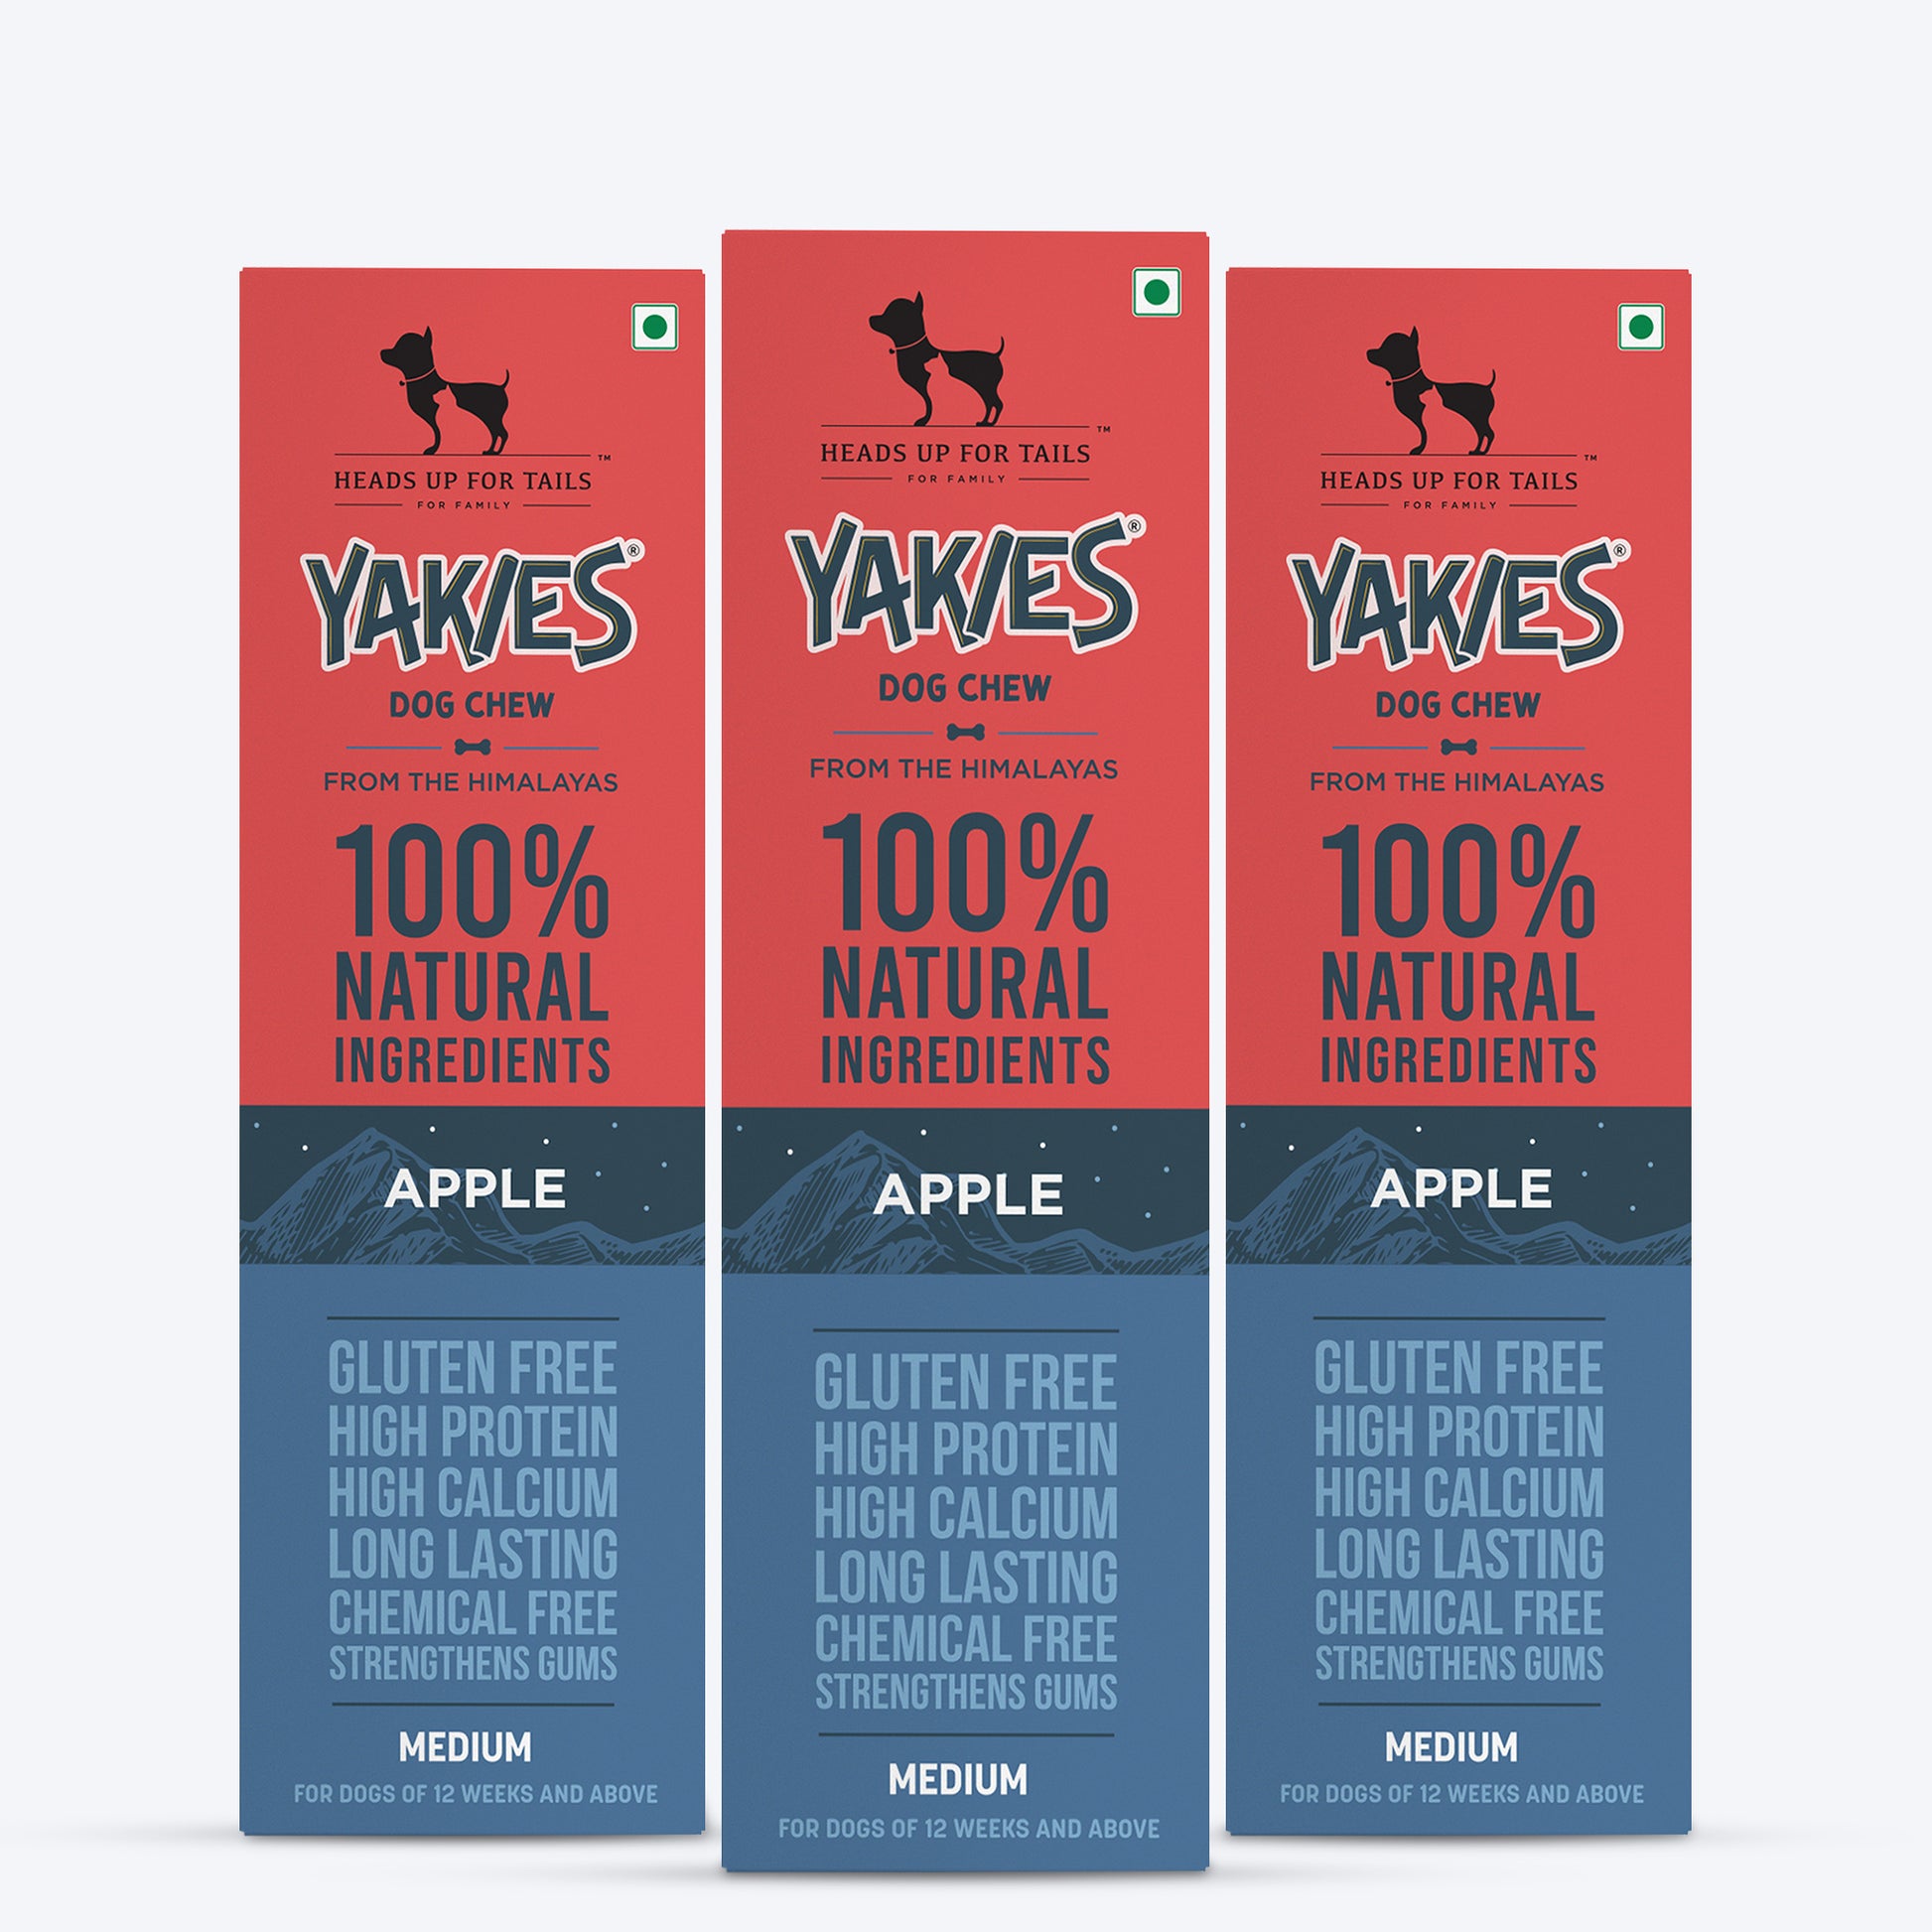 HUFT Yakies Vegetarian Natural Chew Bone - Apple - Heads Up For Tails